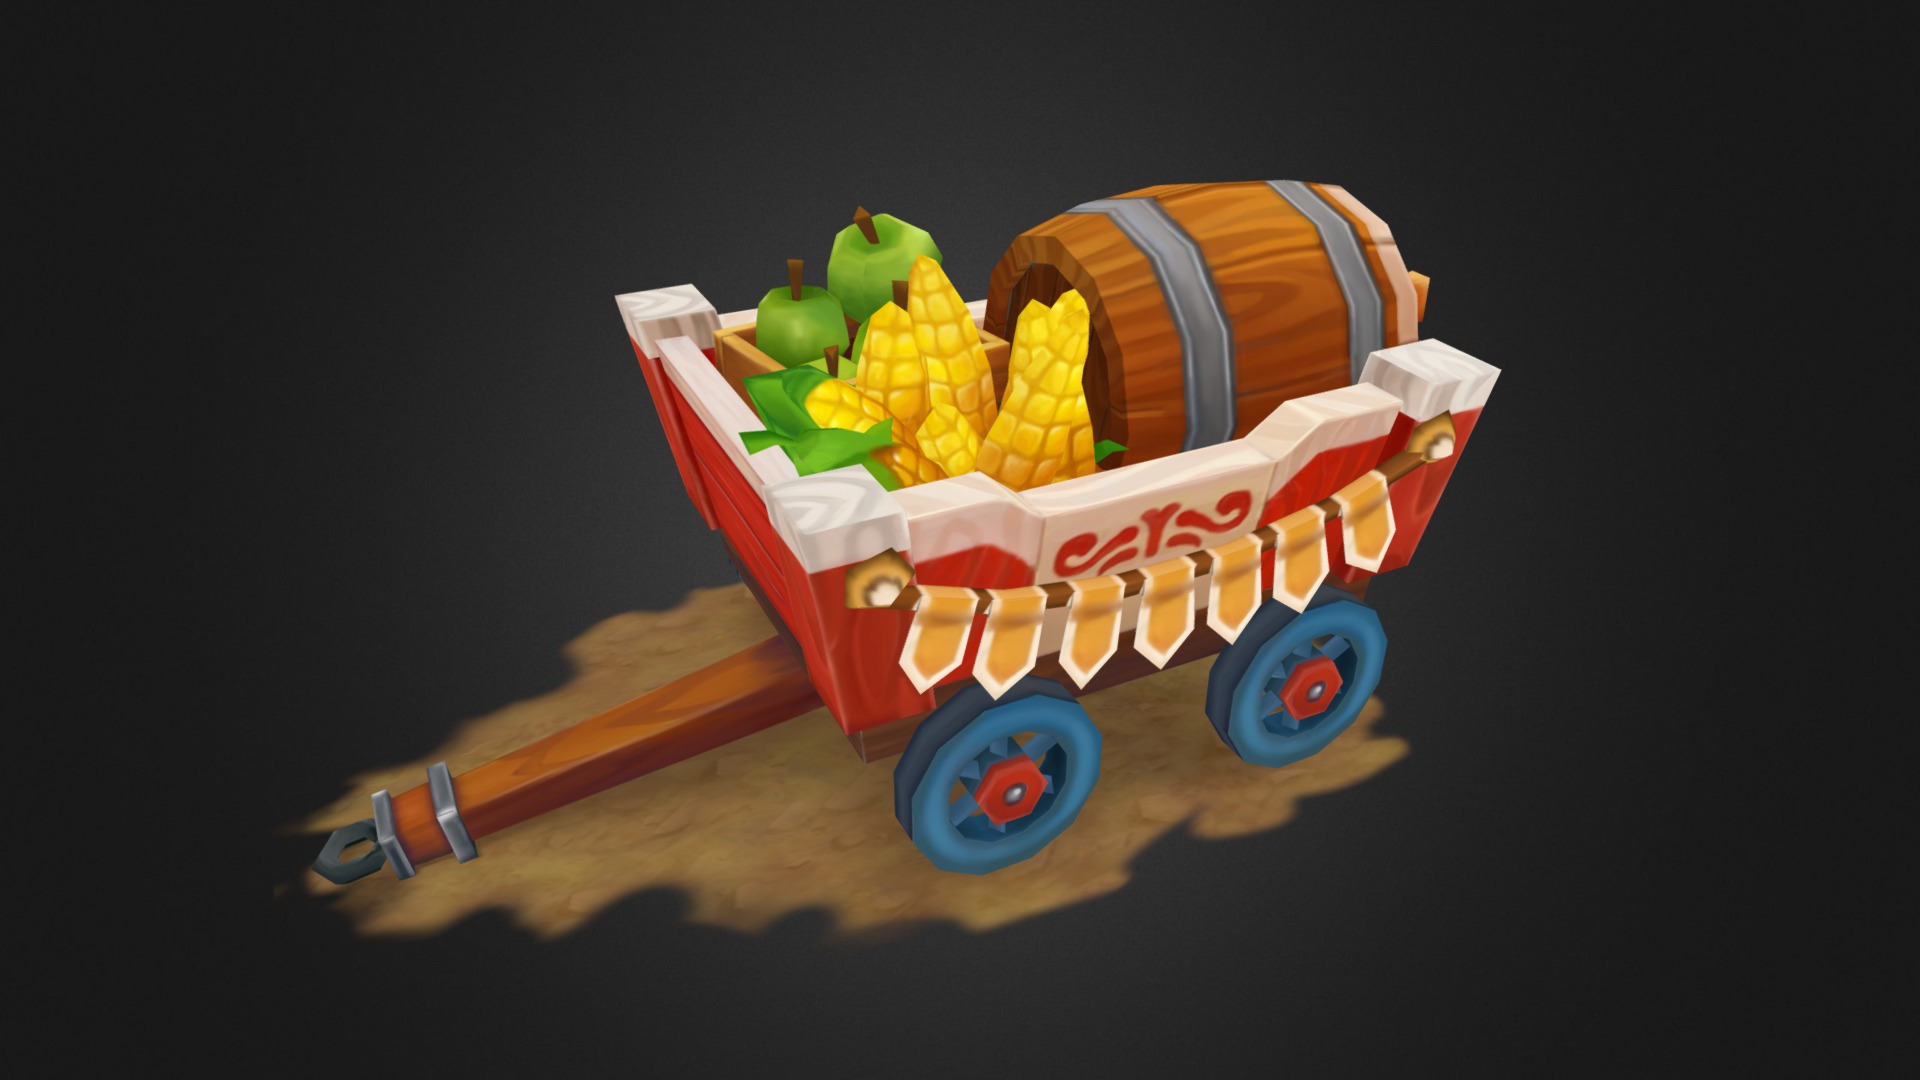 3D model telega - This is a 3D model of the telega. The 3D model is about a toy train with fruit on top.